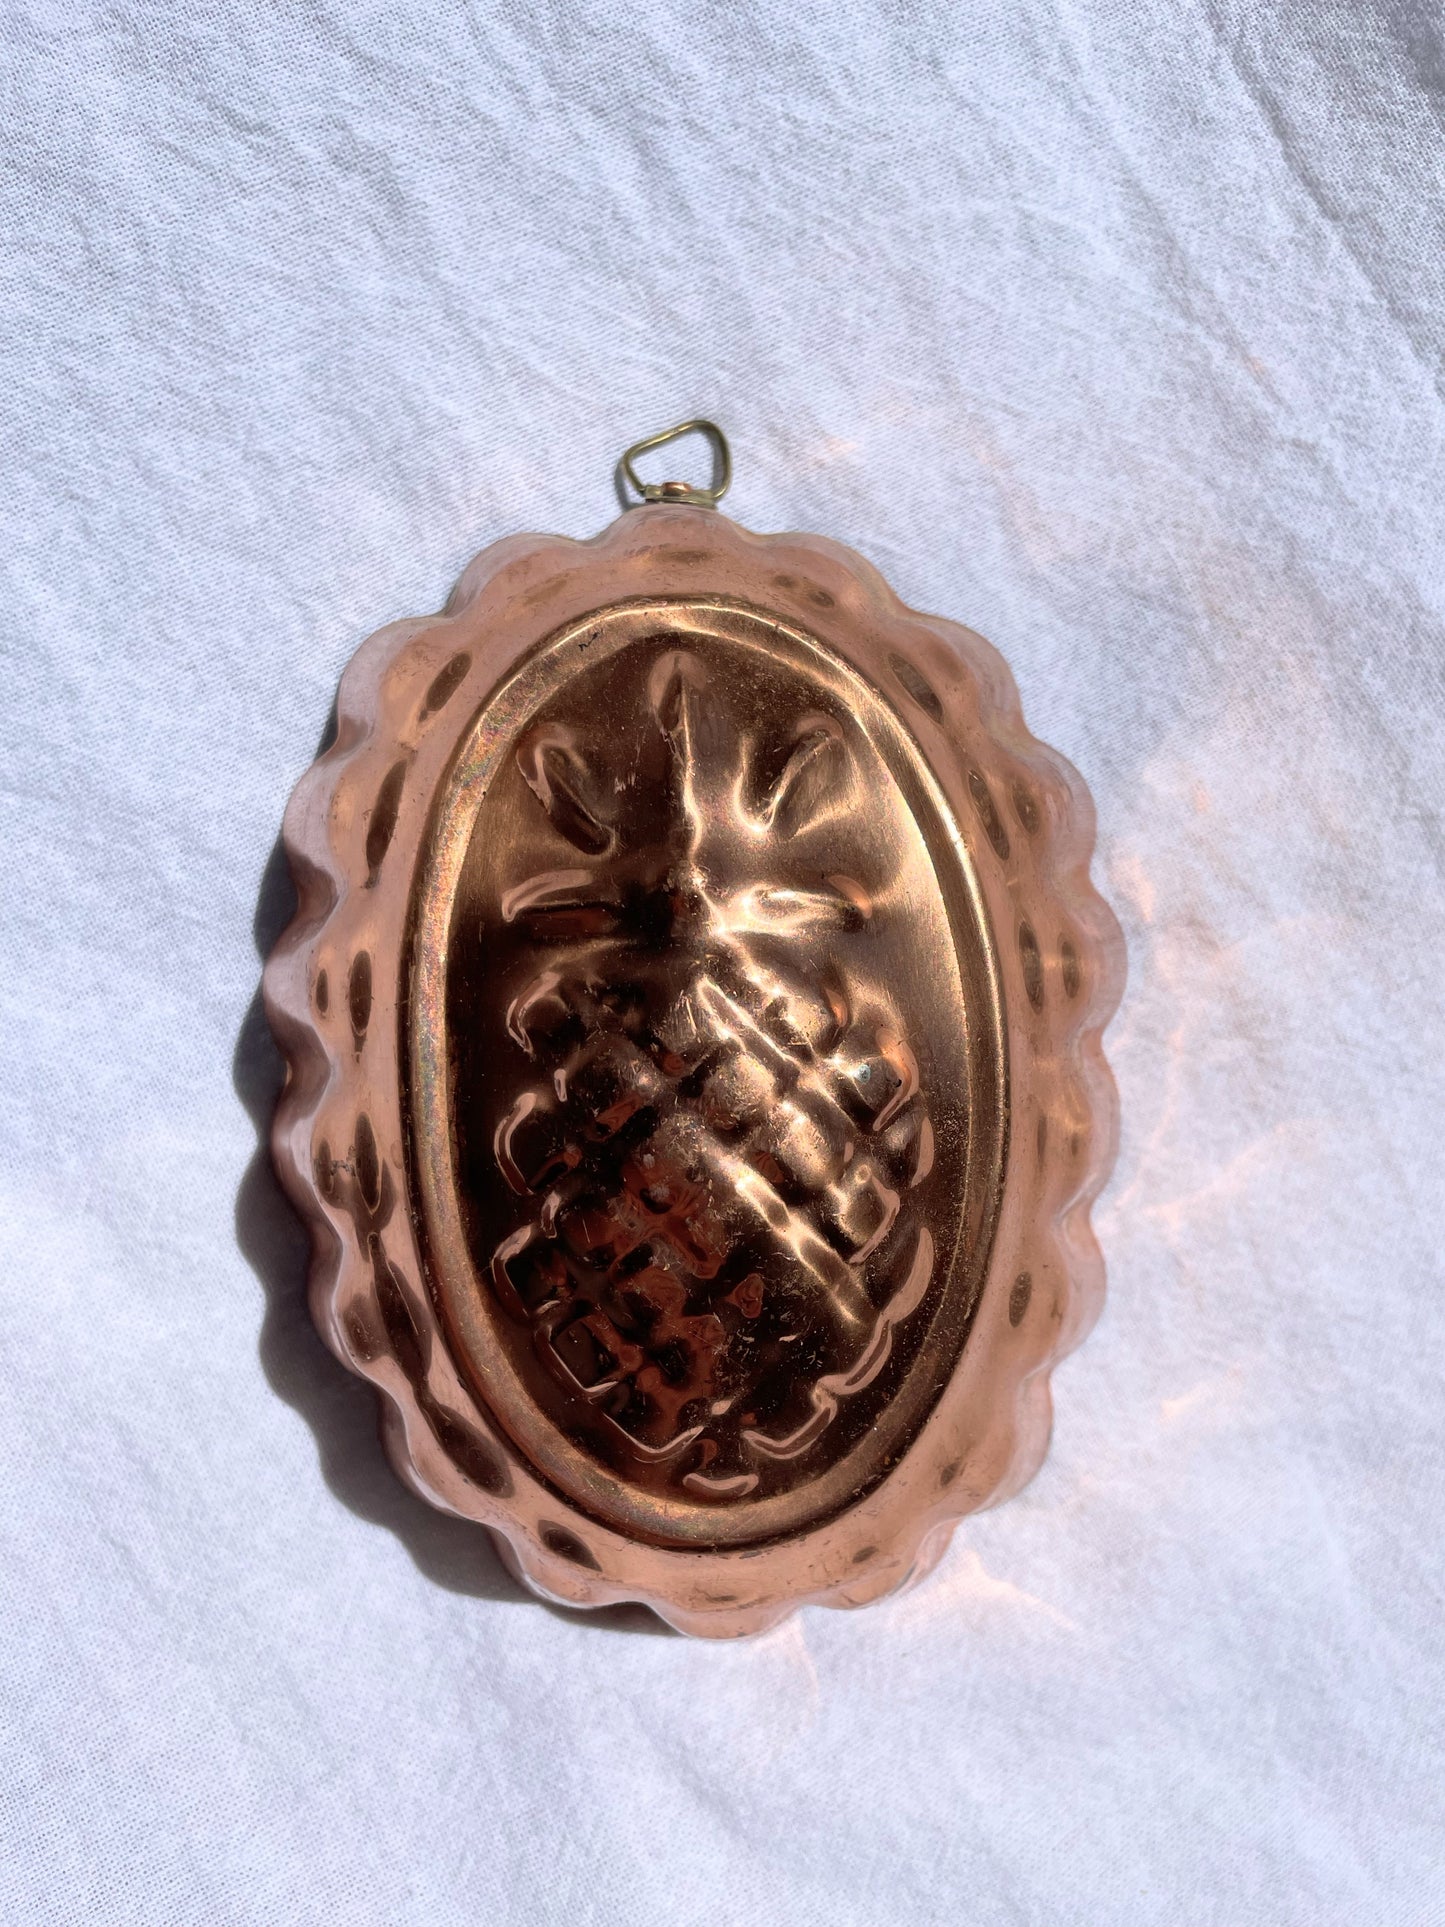 Small Copper Mold of a Pineapple